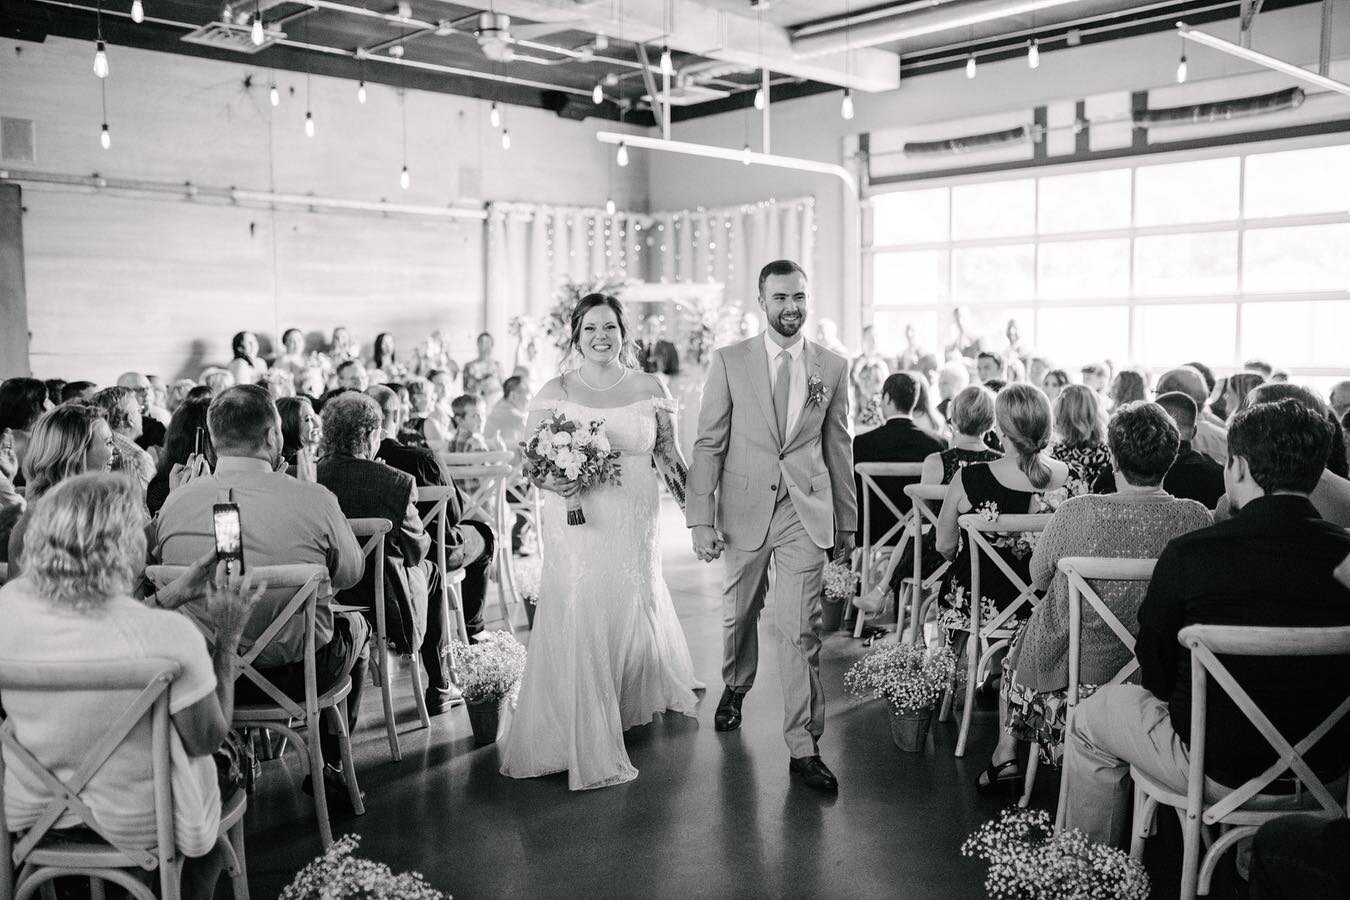 Rain or shine, Terrace167 has you covered! We love our indoor ceremonies.
.
.
.
p.s. - Rain is good luck!😉🌦
Photo credit: @azenaphotography